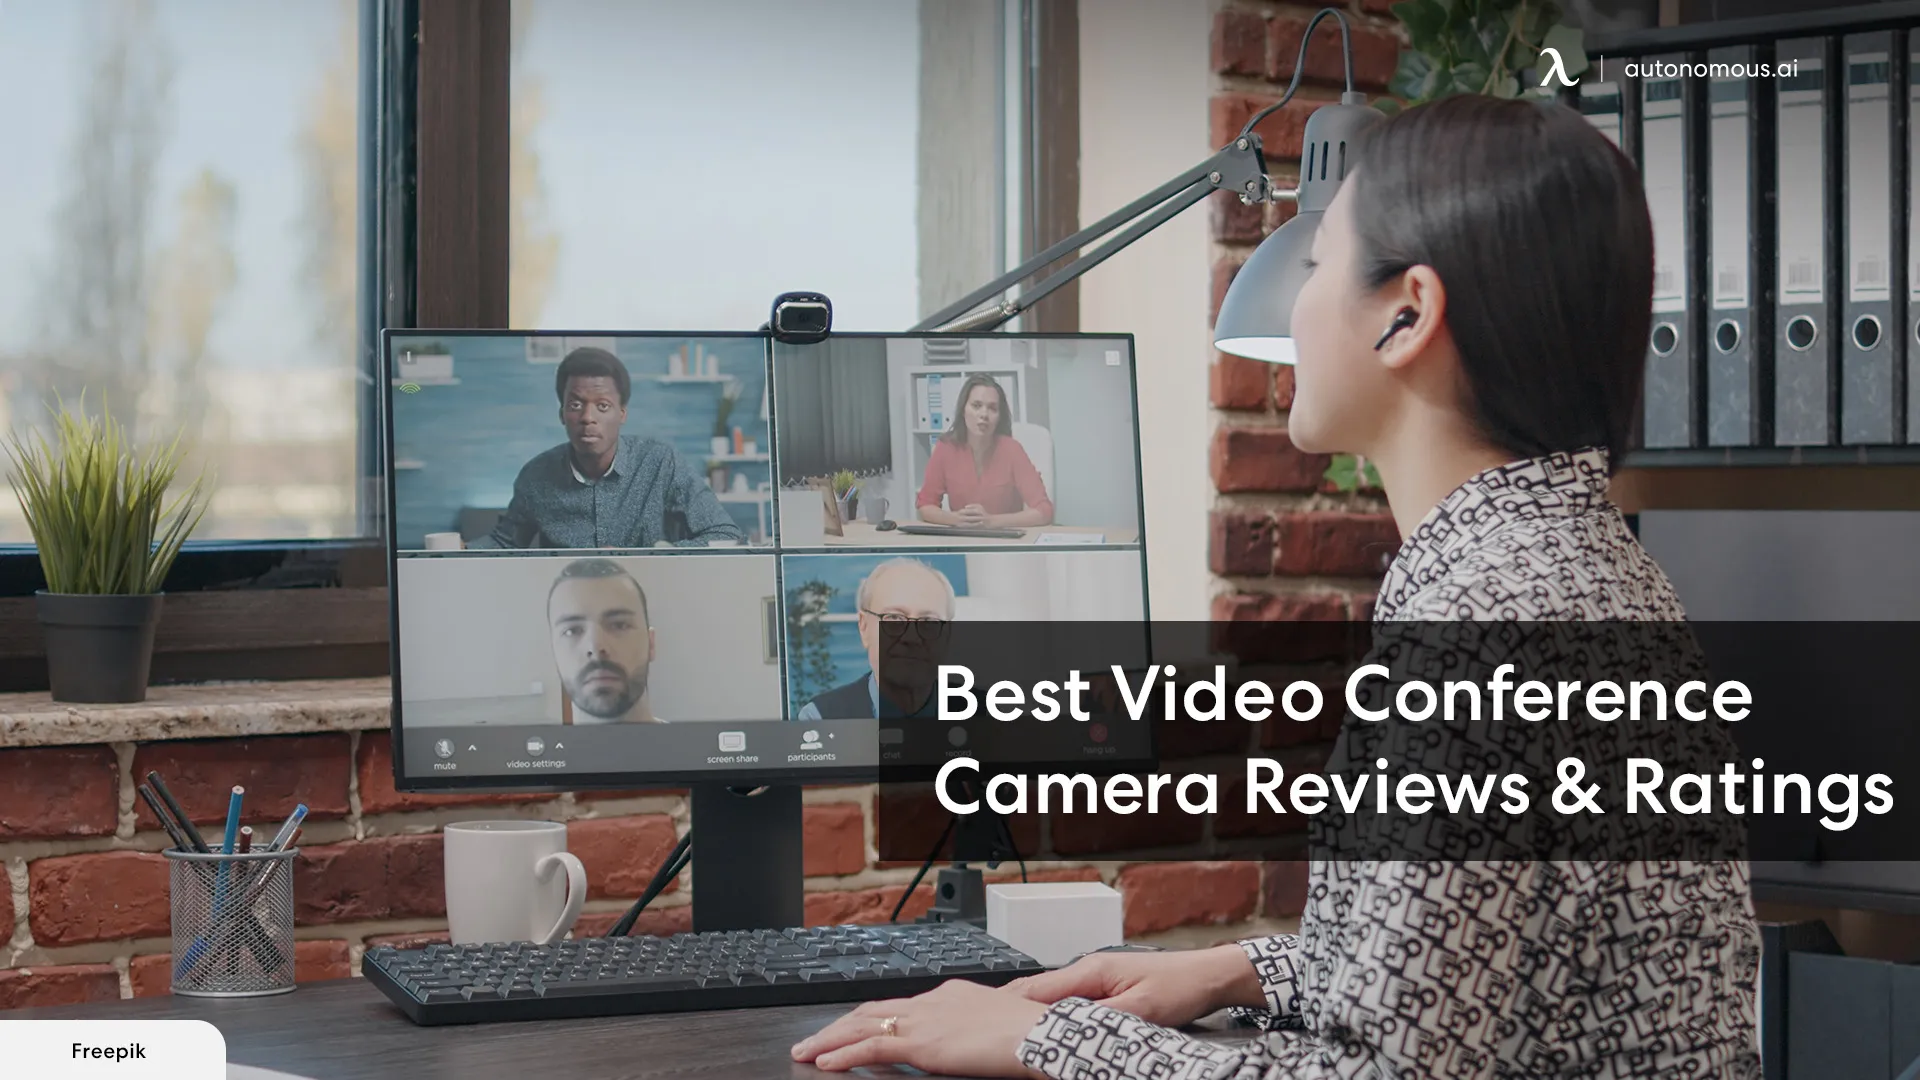 Best Video Conference Camera Reviews & Ratings